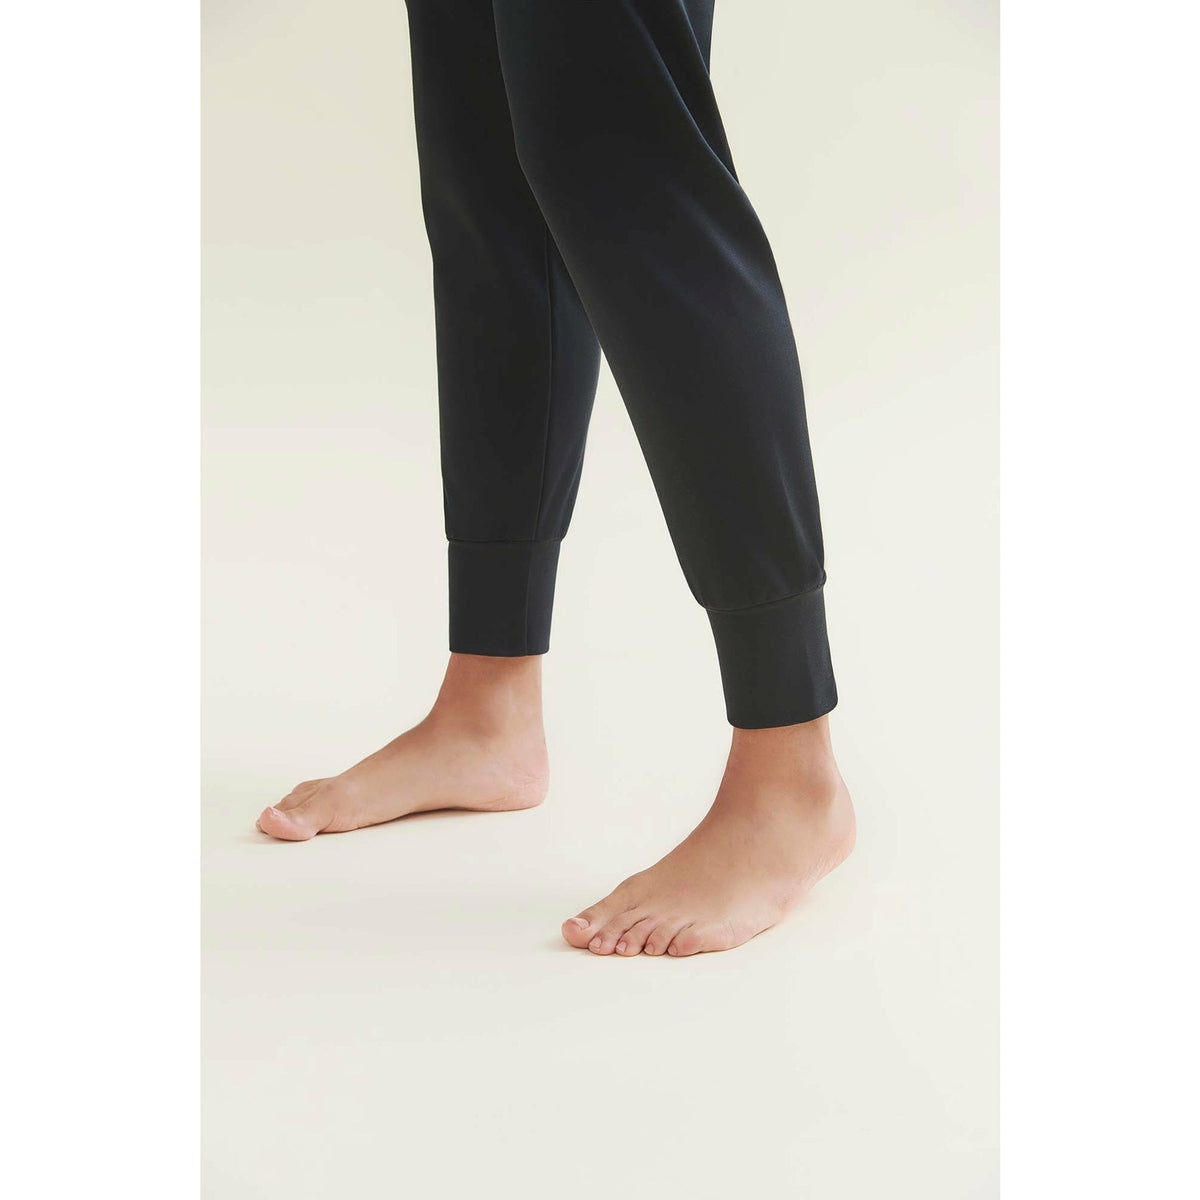 bottom part of womens black yoga pants  by wellicious